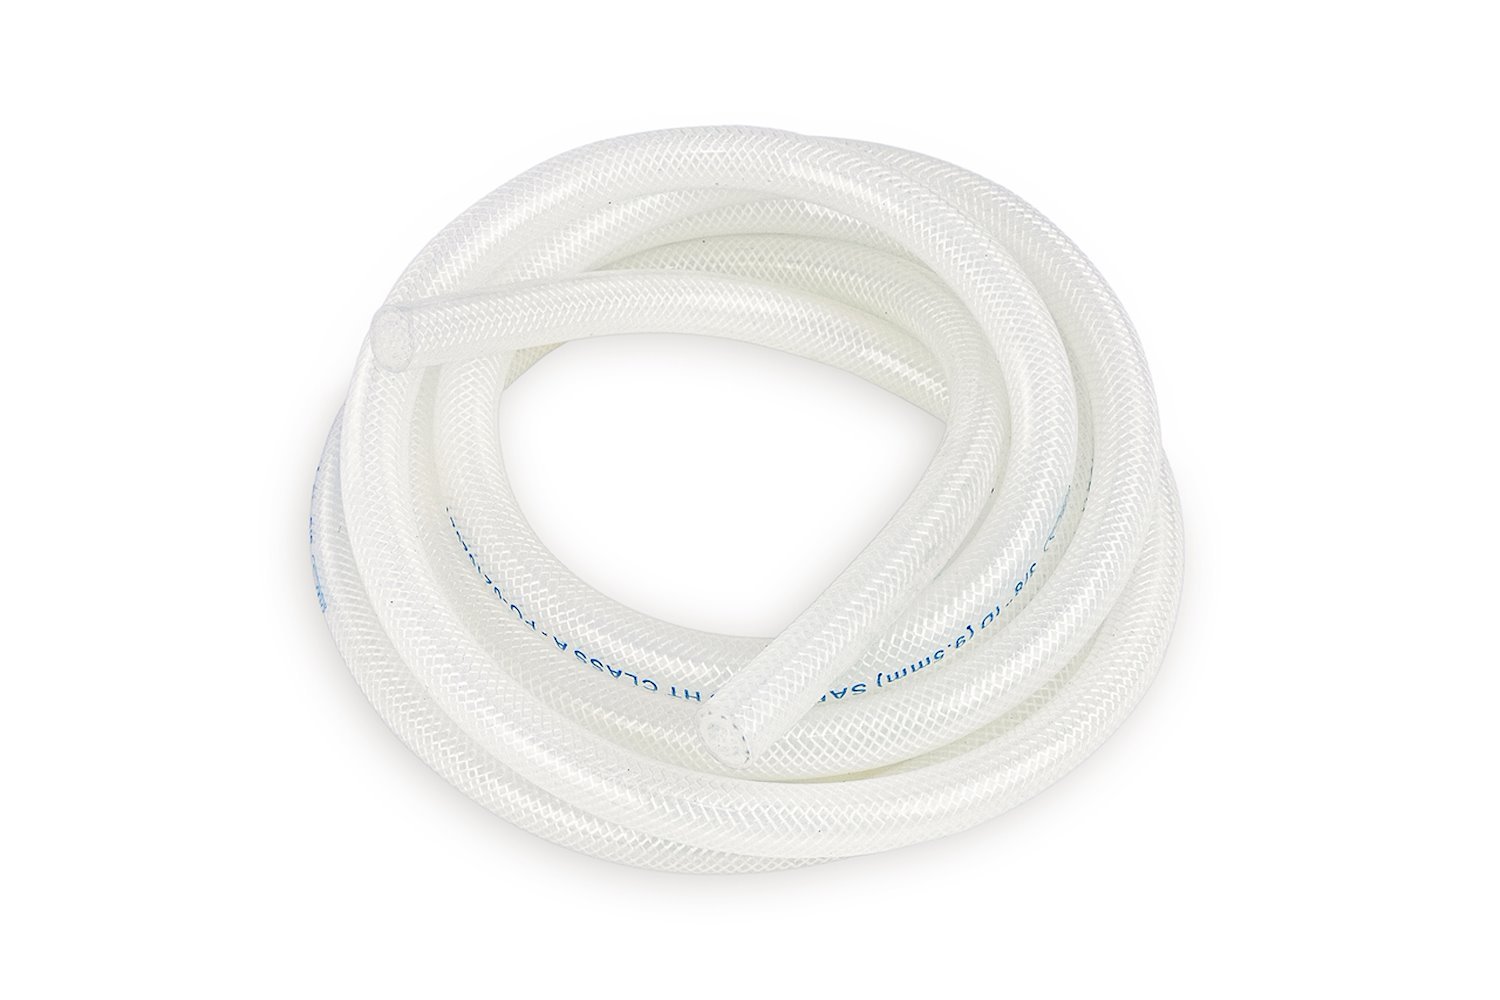 HTHH-087-CLEARx10 Silicone Heater Hose Tubing, High-Temp Reinforced, 7/8 in. ID, 10 ft. Roll, Clear